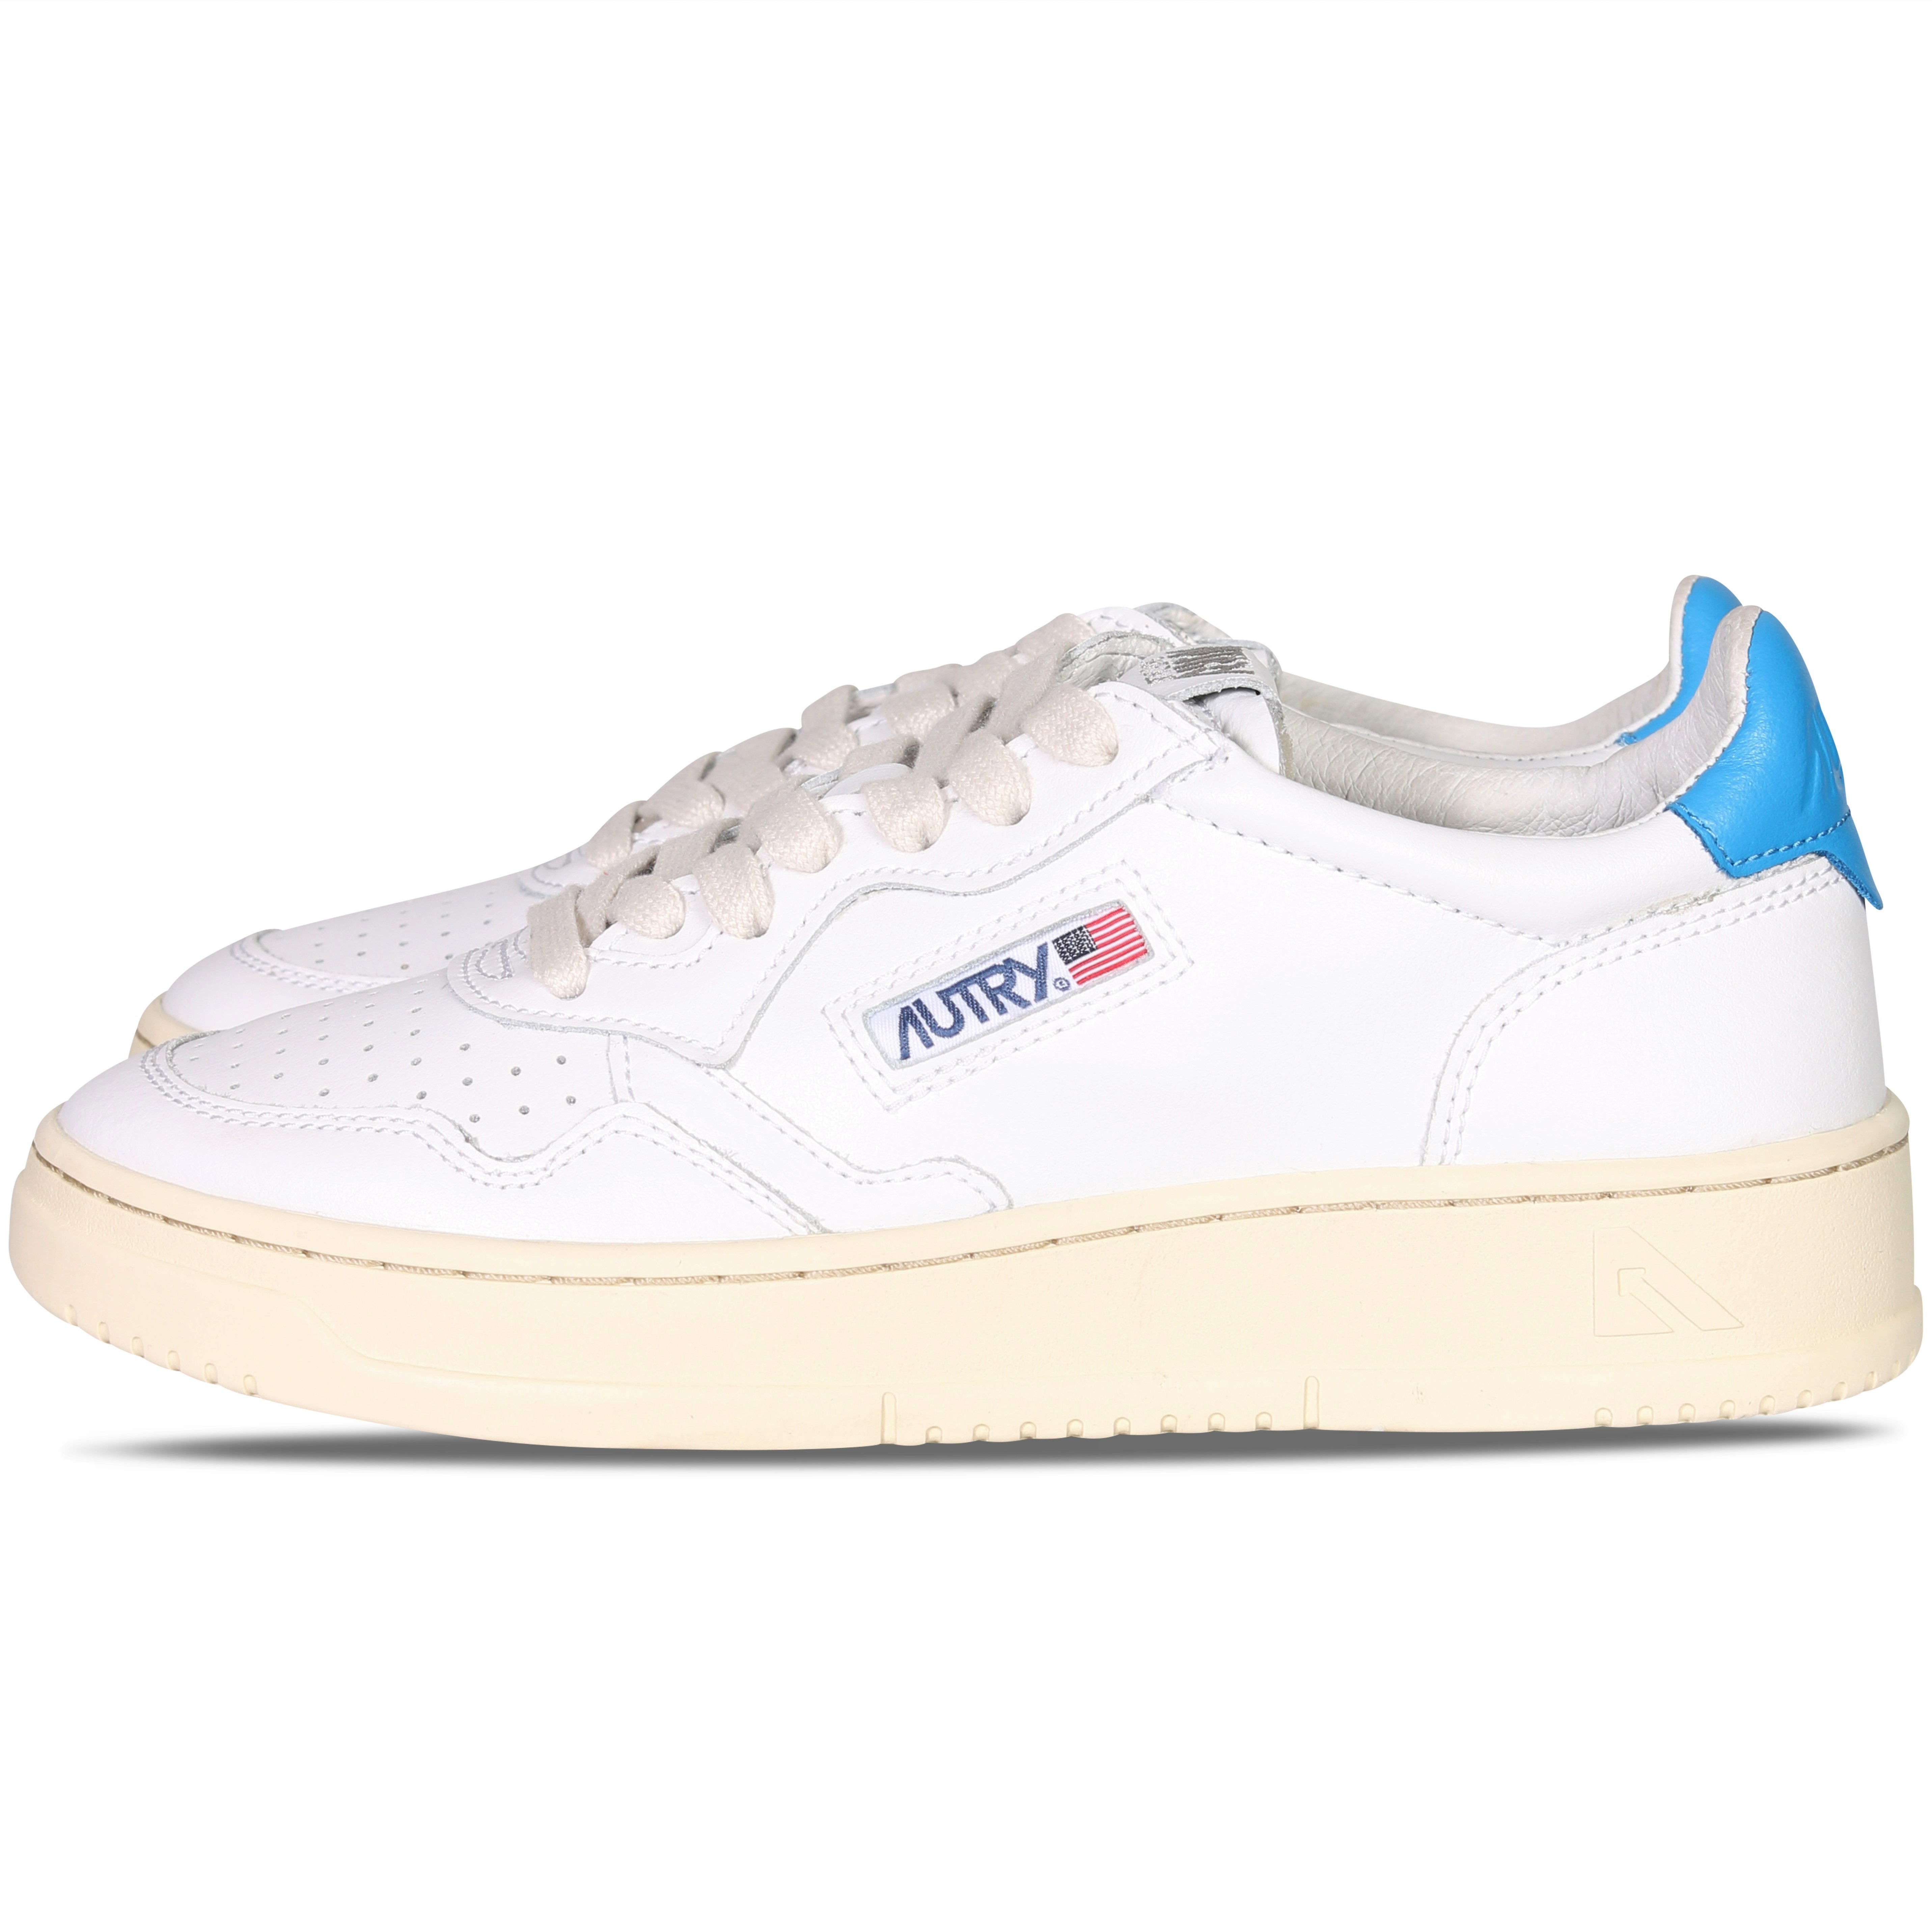 Autry Action Shoes Sneaker White/Azure